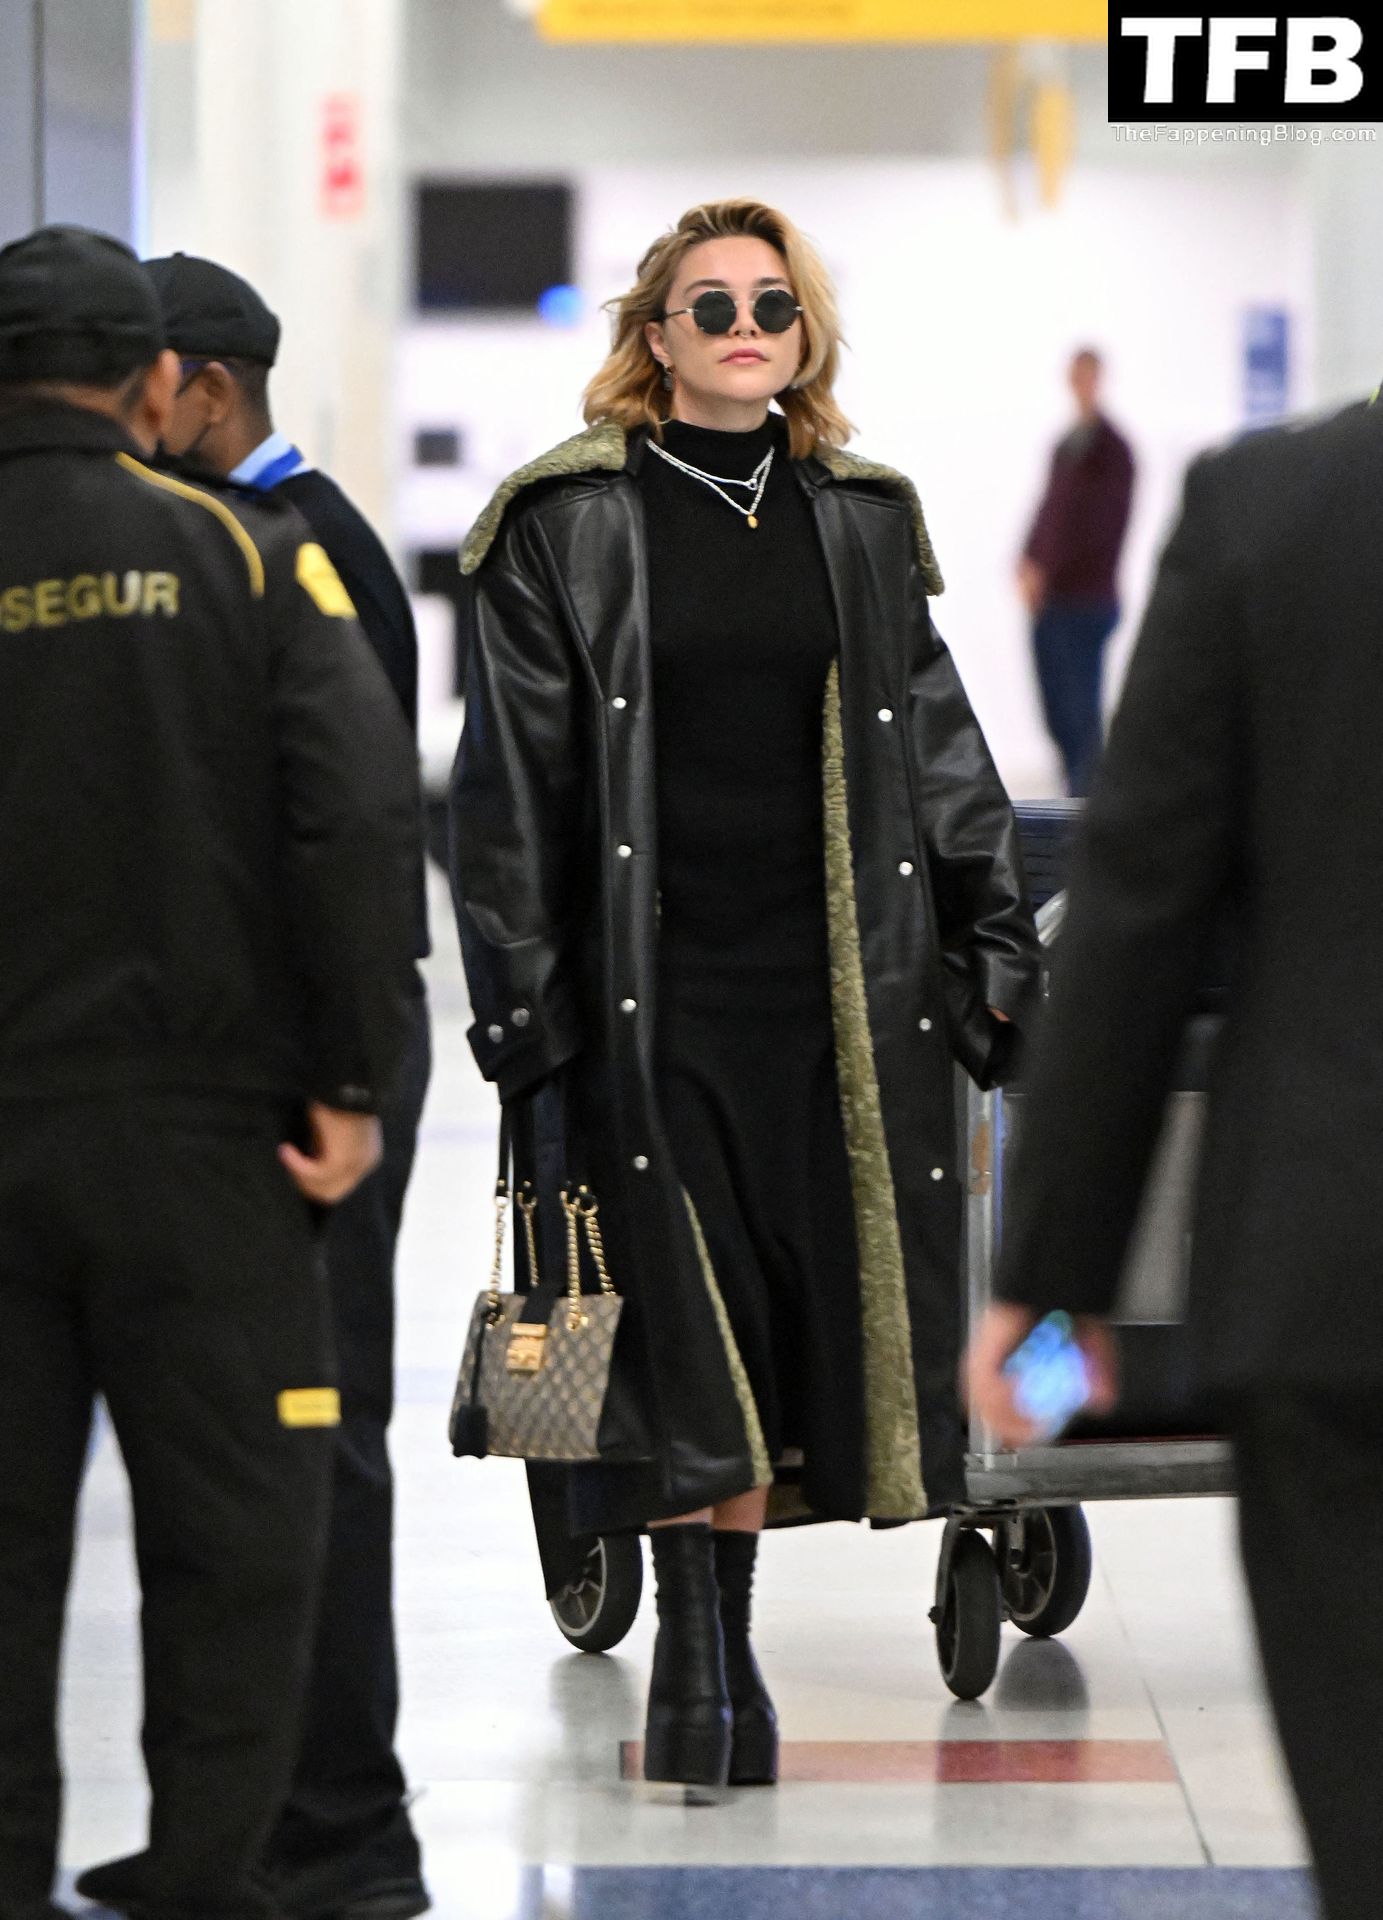 Florence Pugh Pokies The Fappening Blog 17 - Florence Pugh Shows Off Her Pokies at JFK airport in NYC (31 Photos)